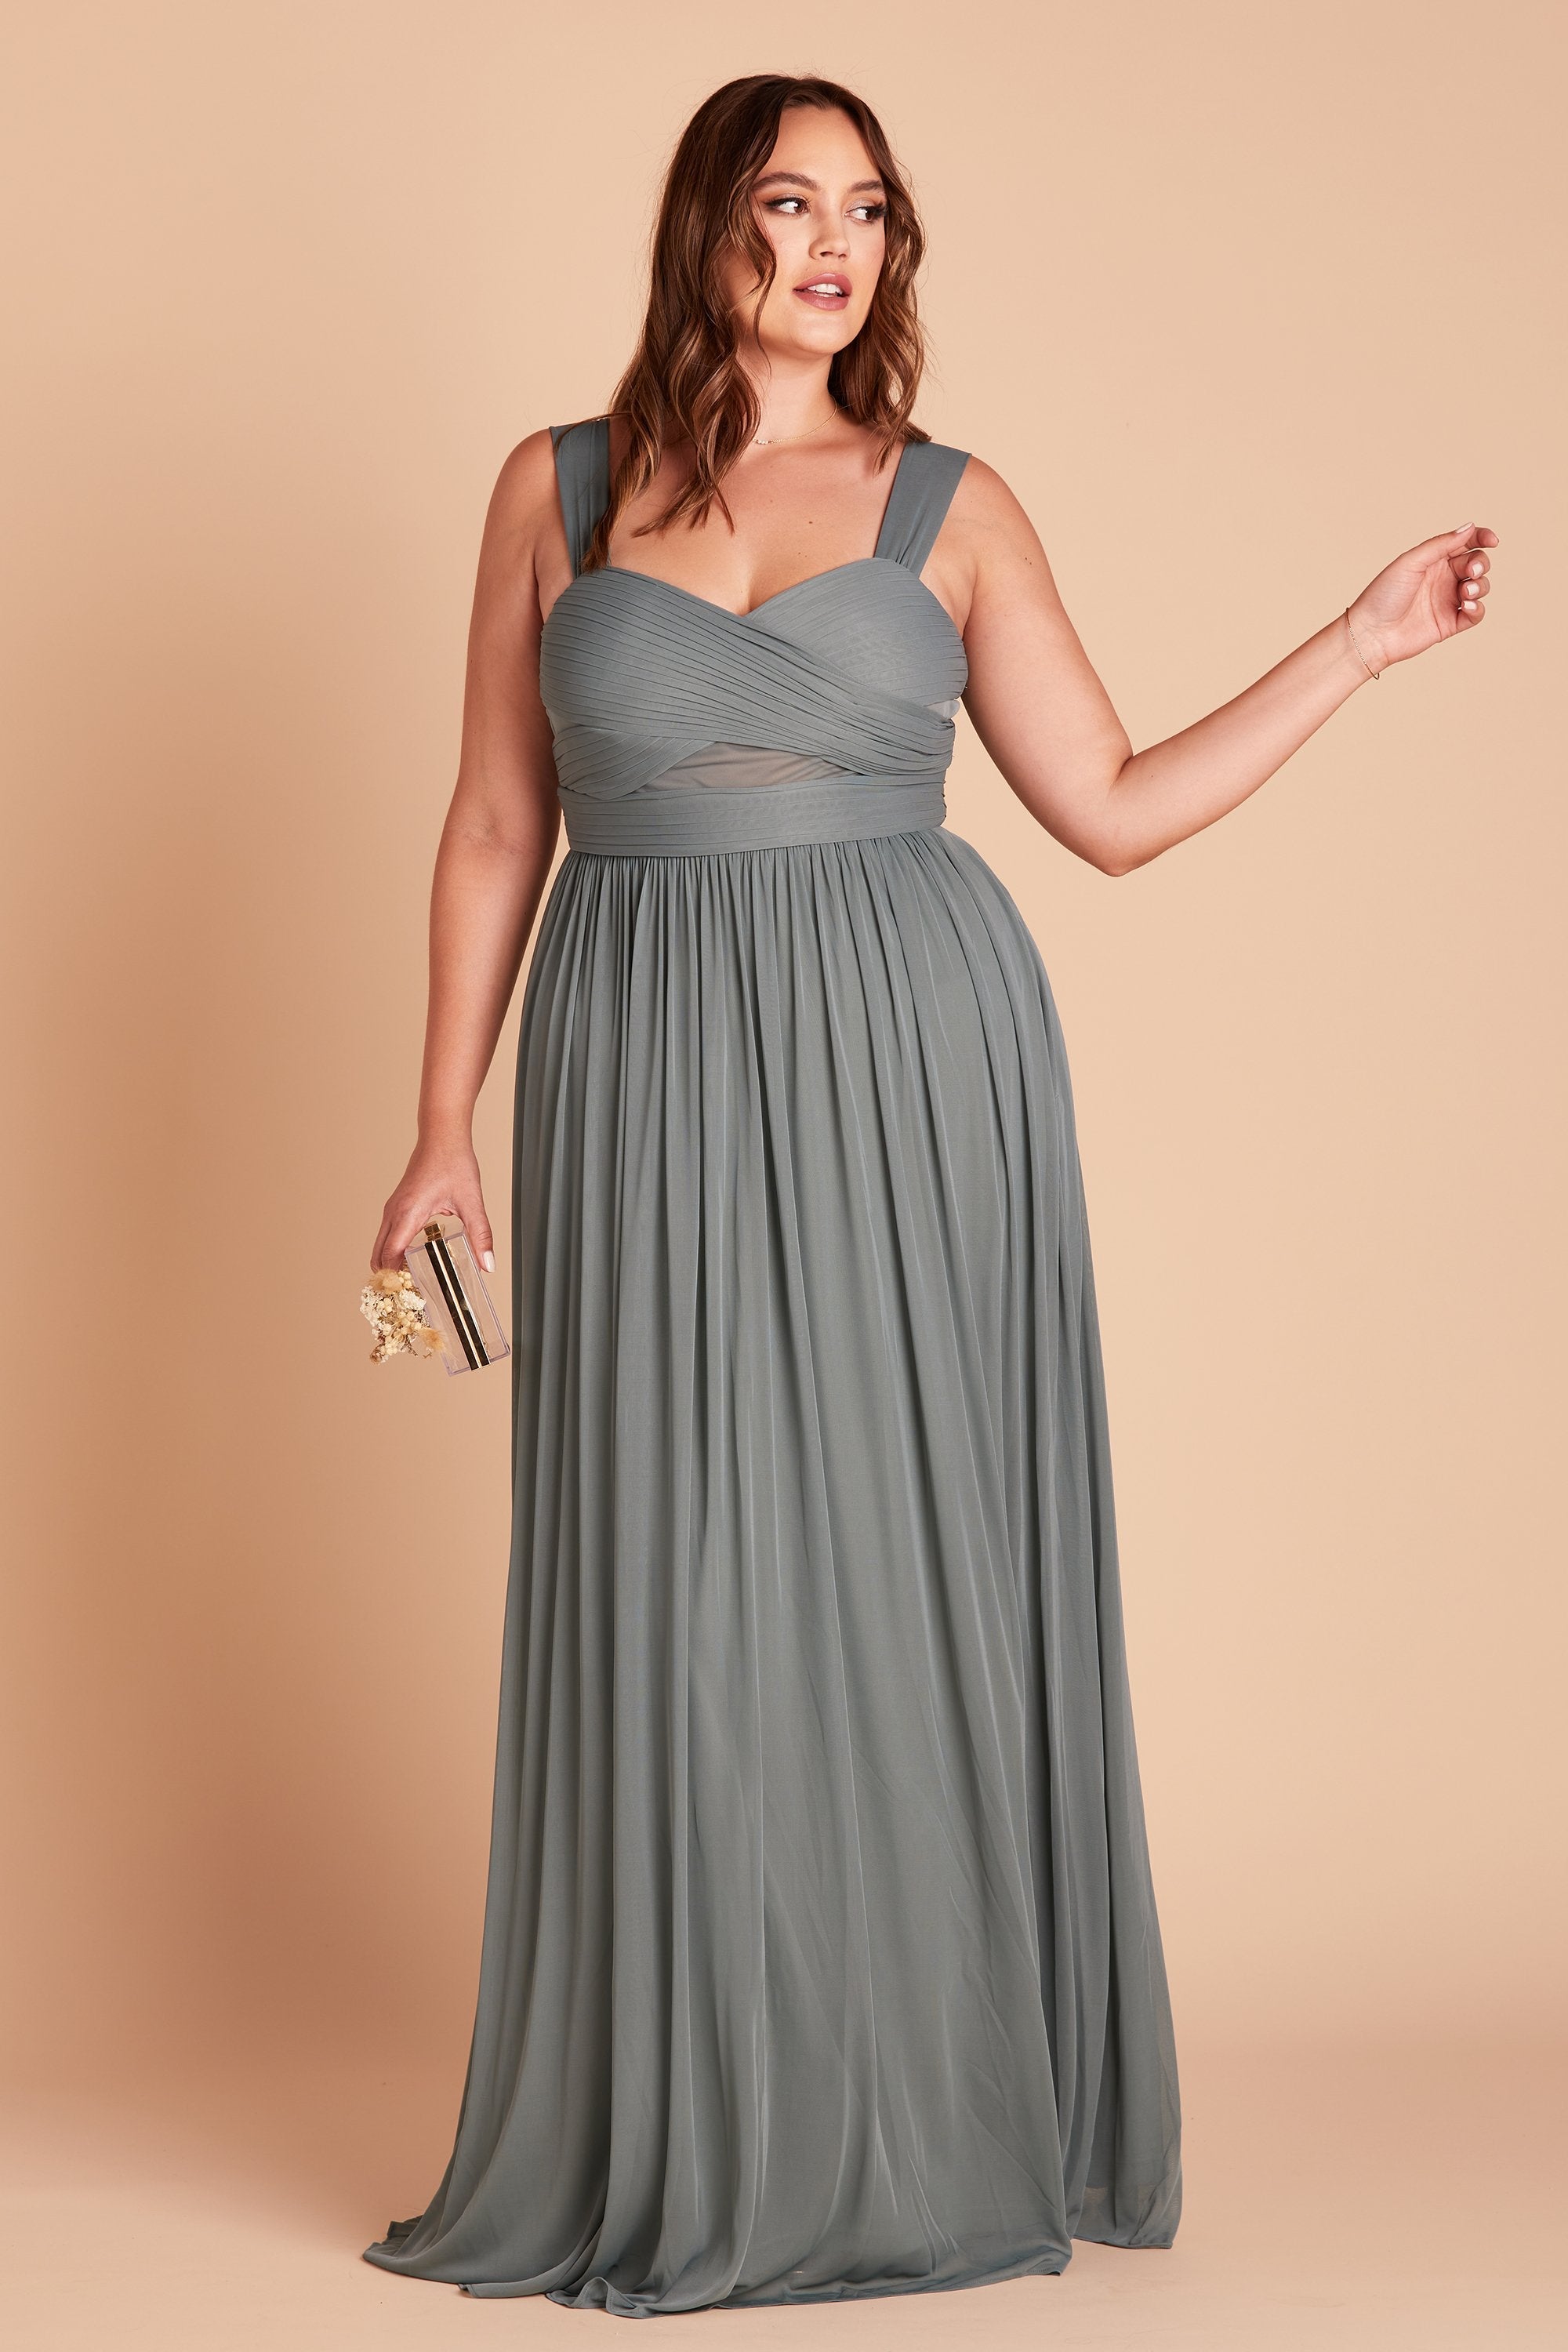 Elsye plus size bridesmaid dress in sea glass green chiffon by Birdy Grey, front view